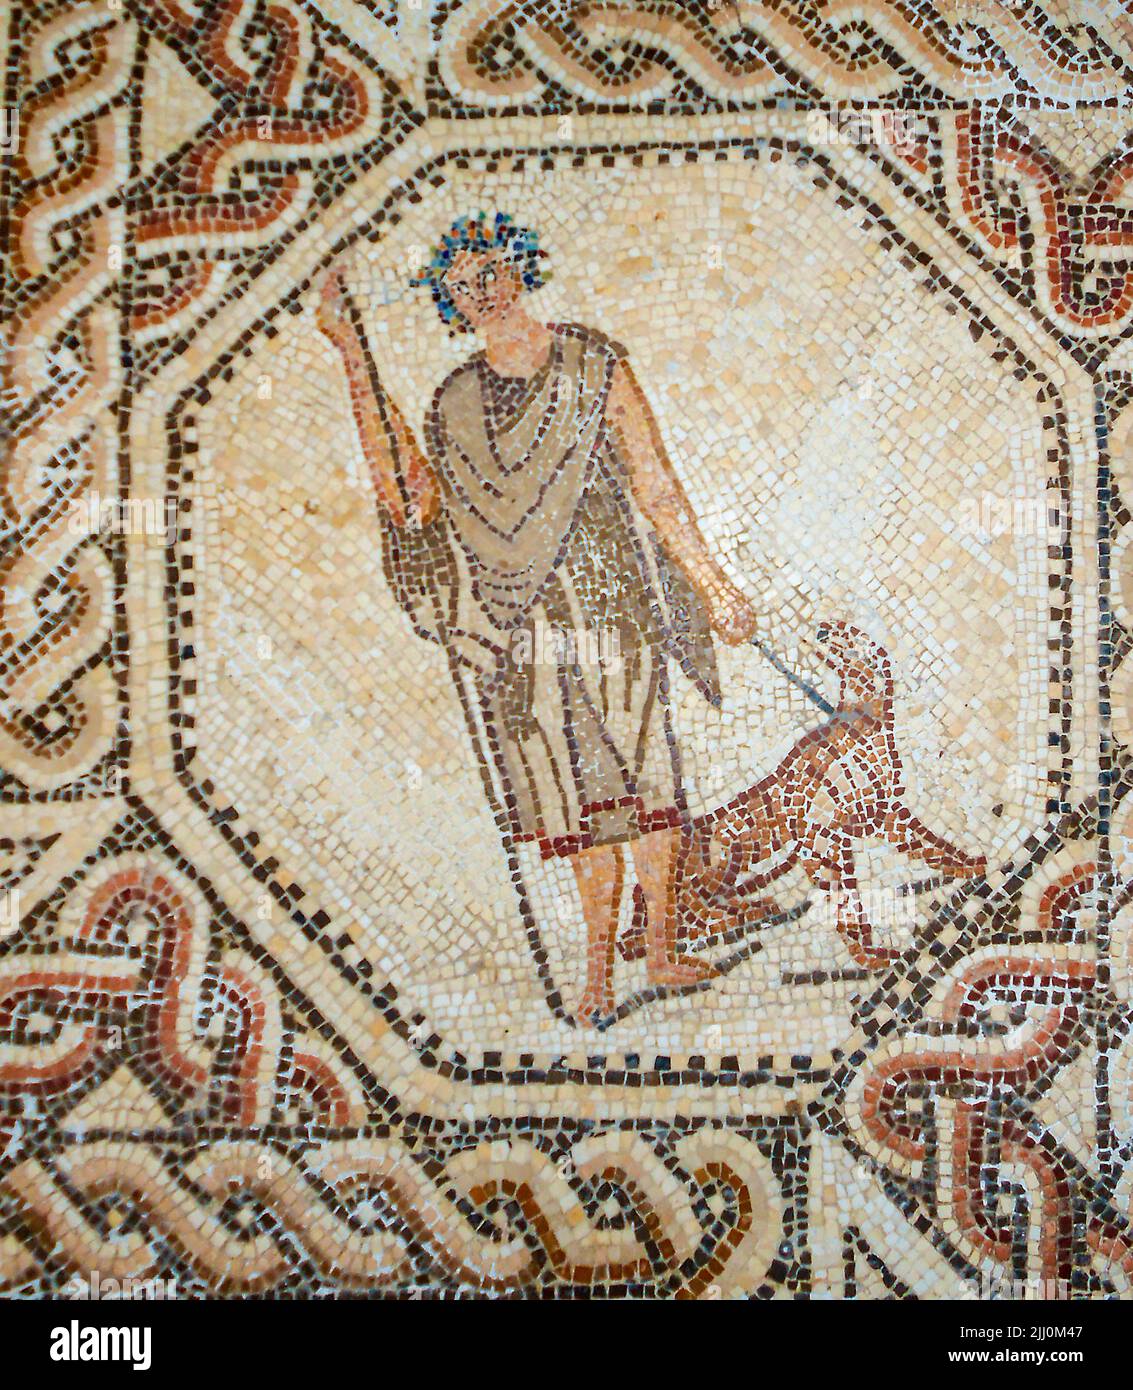 Ancient Roman mosaic on floor of house in Seville, Andalucia, Spain Stock Photo